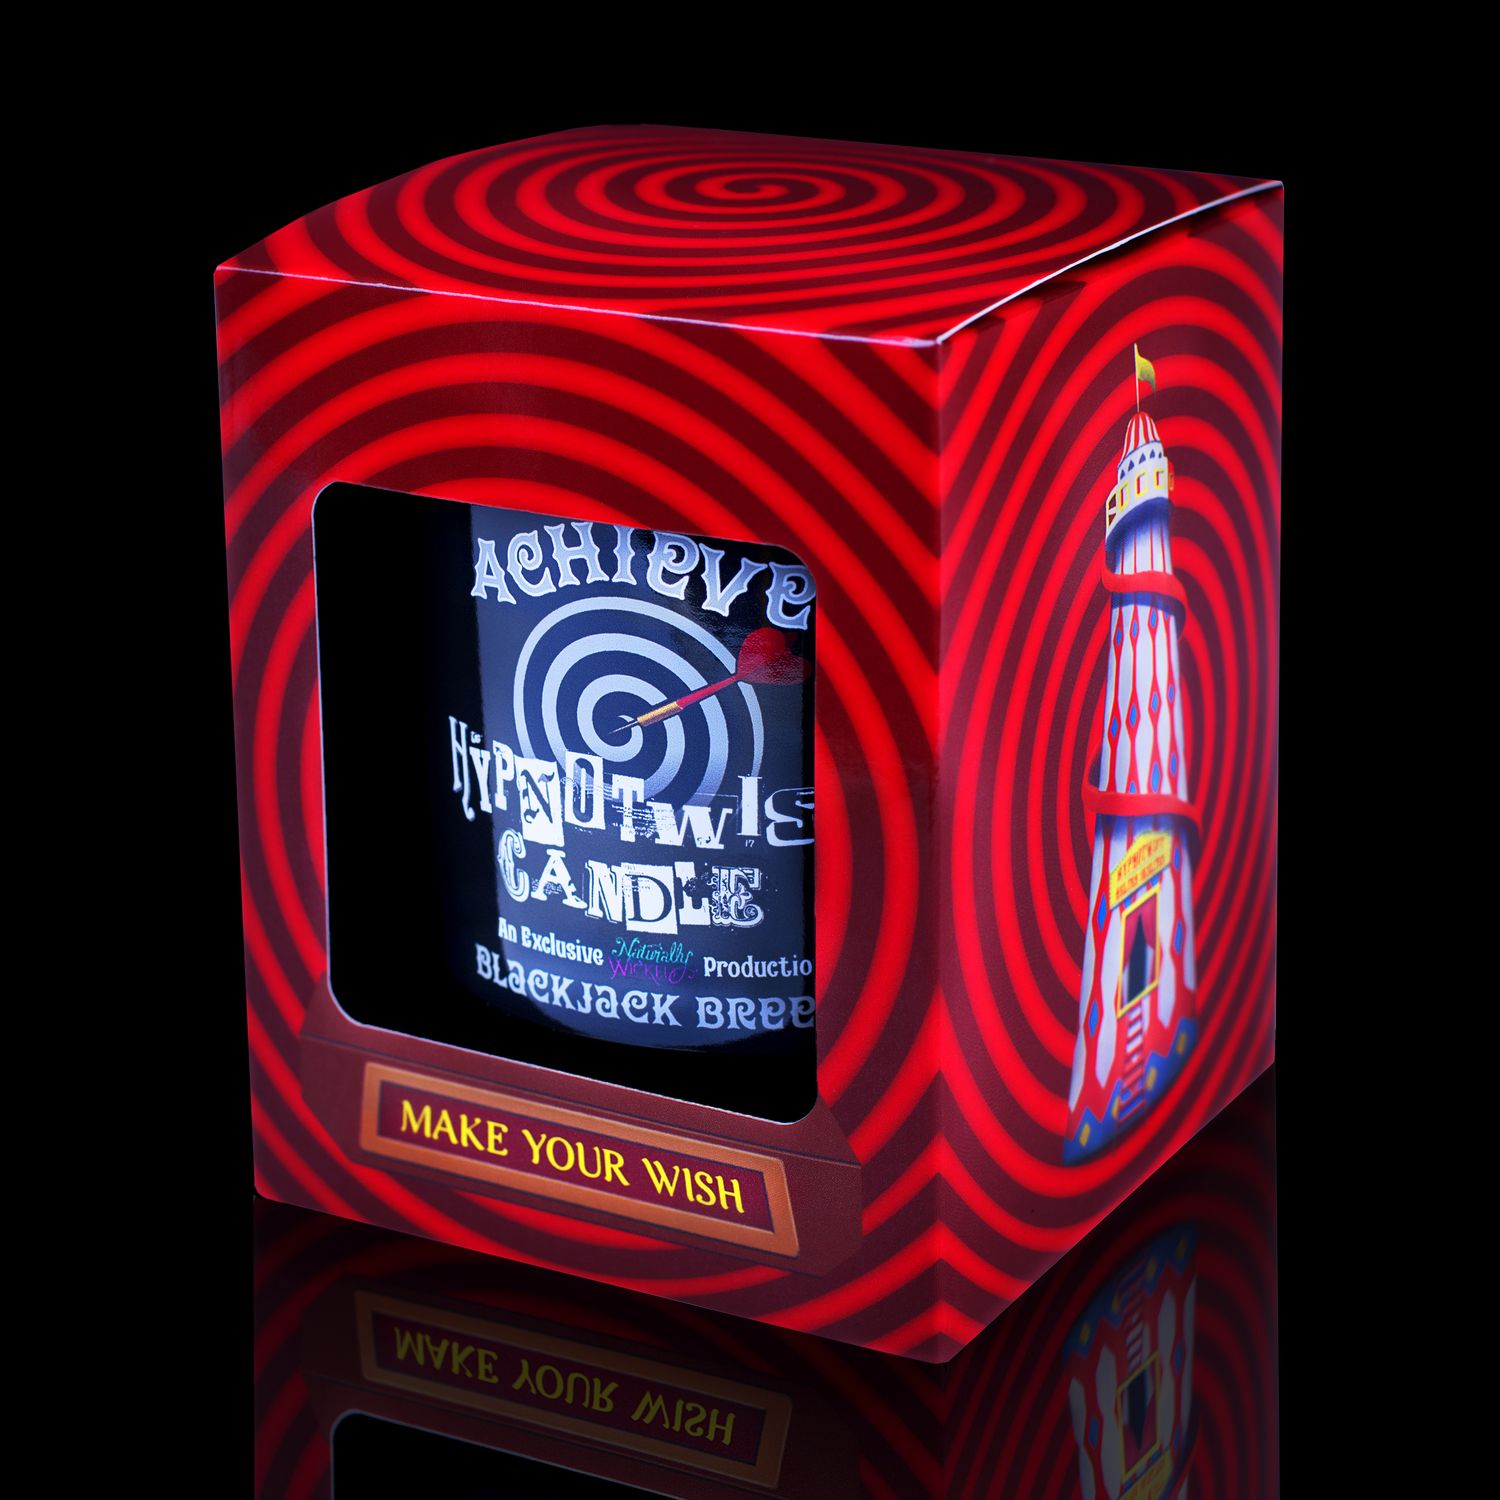 Side View Of The Naturally Wicked Hypnotwist Achieve Candle, Plant-based Soy Black Wax Scented With Blackjack Breeze, Including A Zebra Jasper Crystal Spinning Top, Mirrored Lid & Red Circus Hypnotic Gift Box